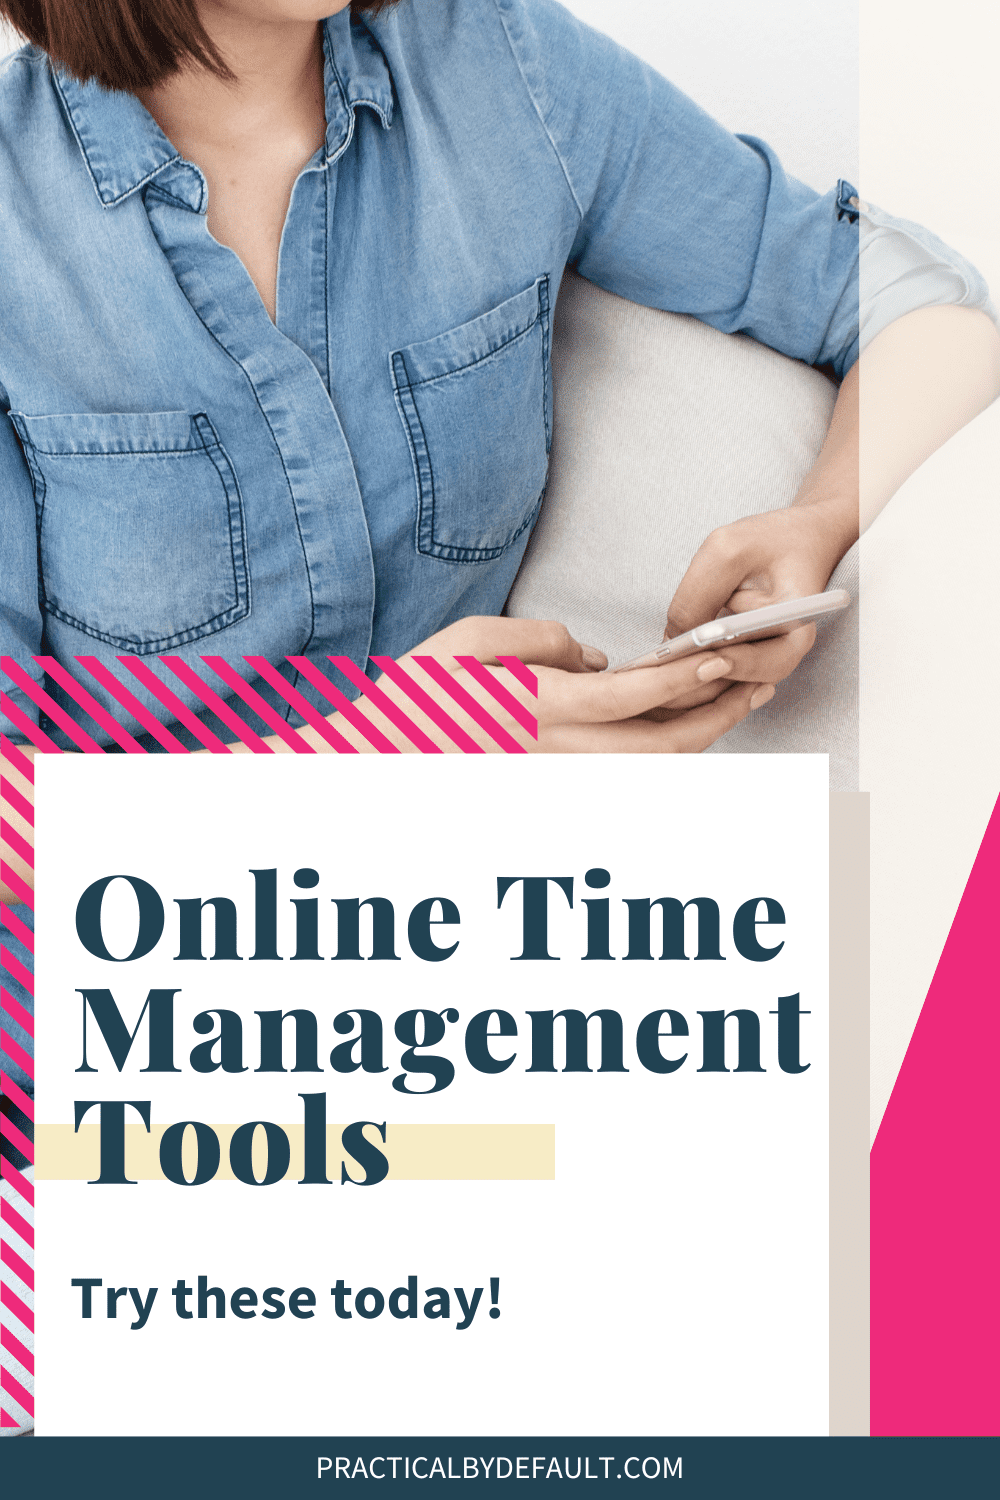 Online Time Management Tools